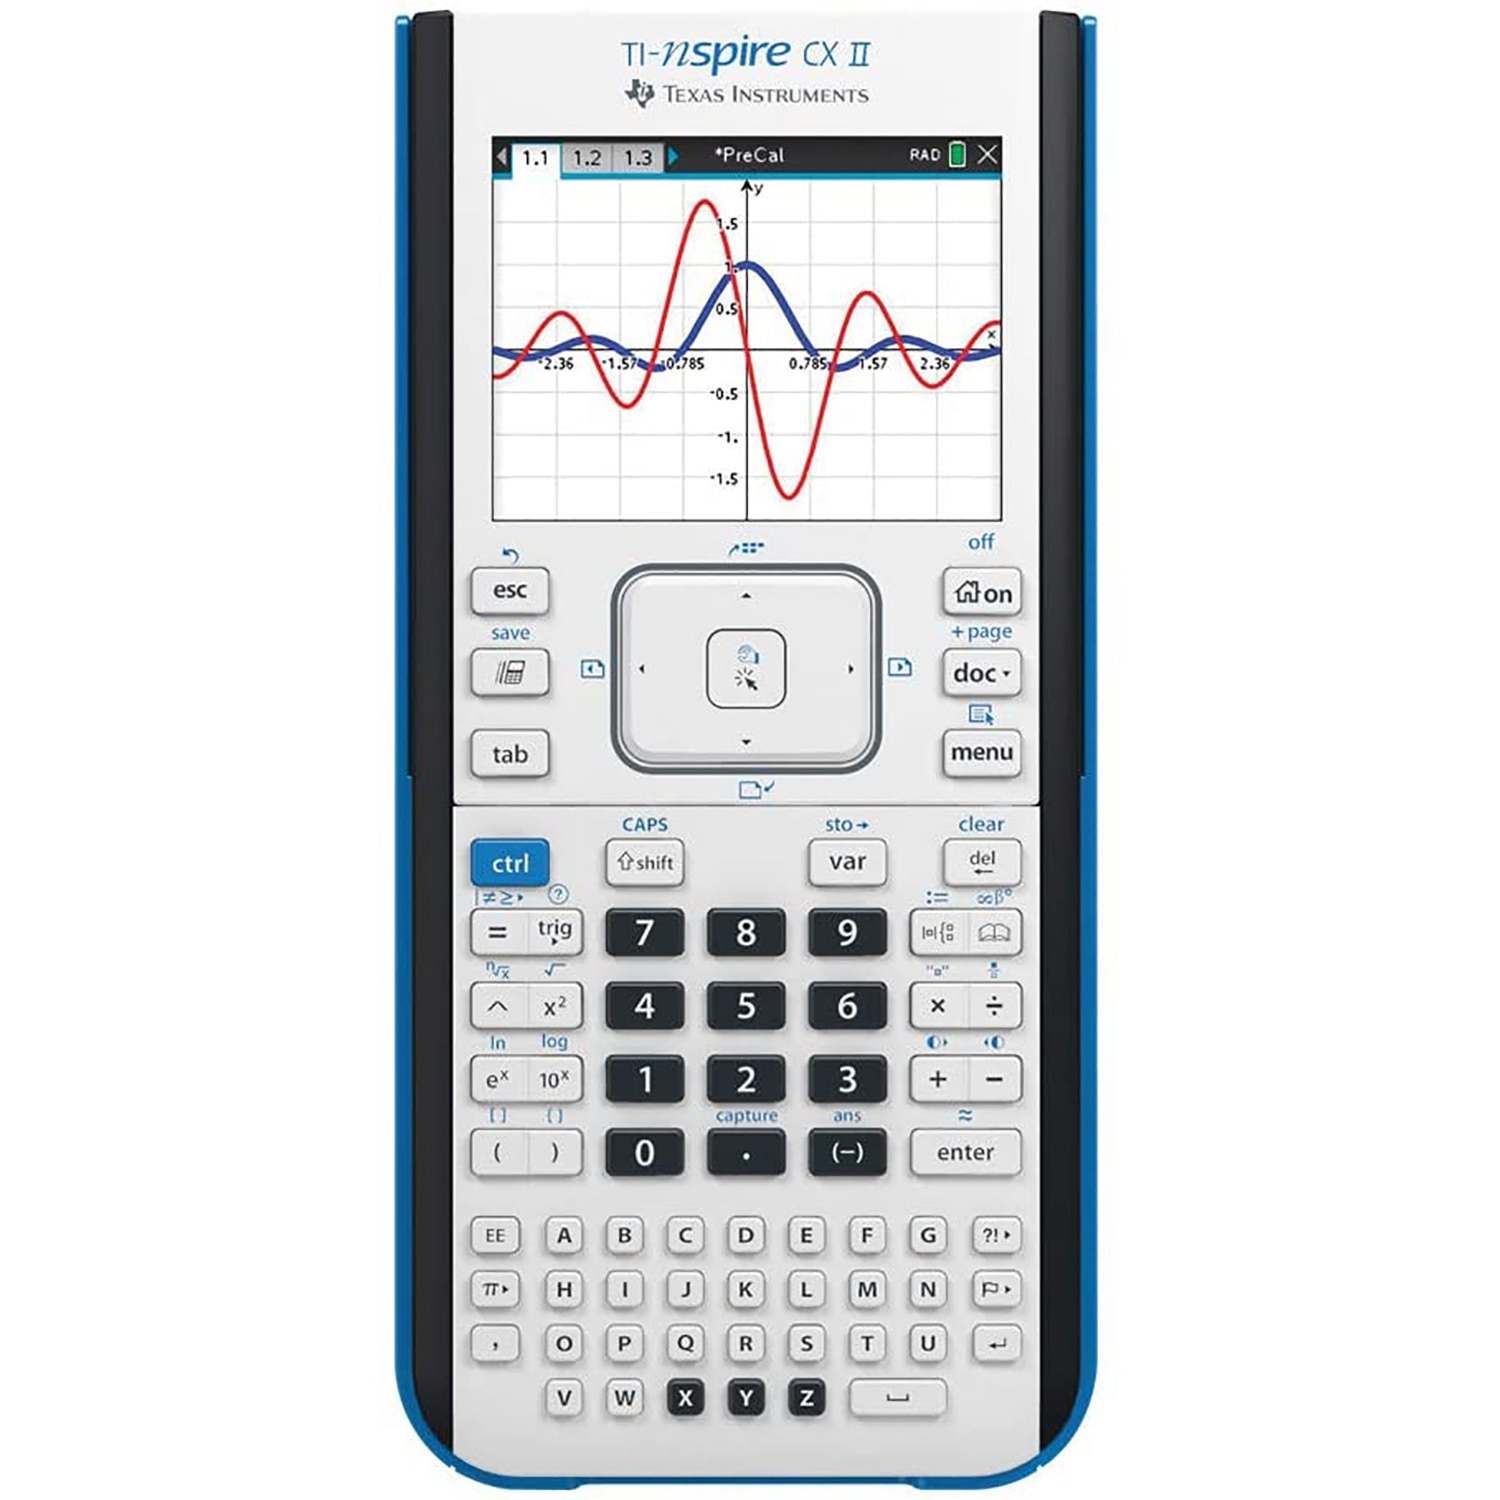 Advanced graphing handheld with Computer Algebra System (CAS) functionality, full-color display, TI Rechargeable Battery and licensed TI-Inspire CX CAS Student Software.